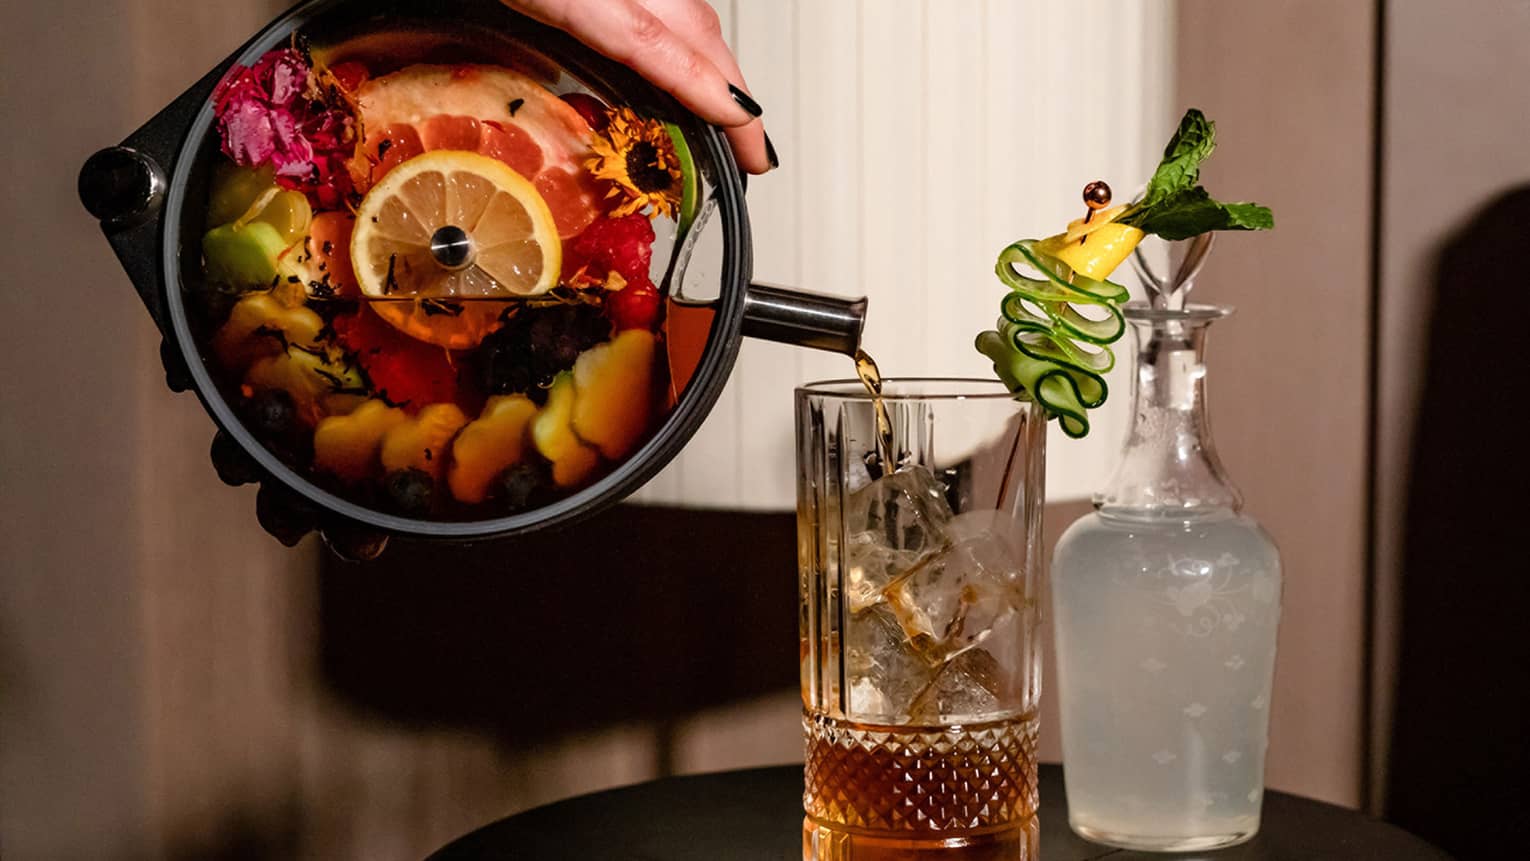 Pimm’s Cup signature drink at Bandista, fruit-infused cocktail being poured into tall glass